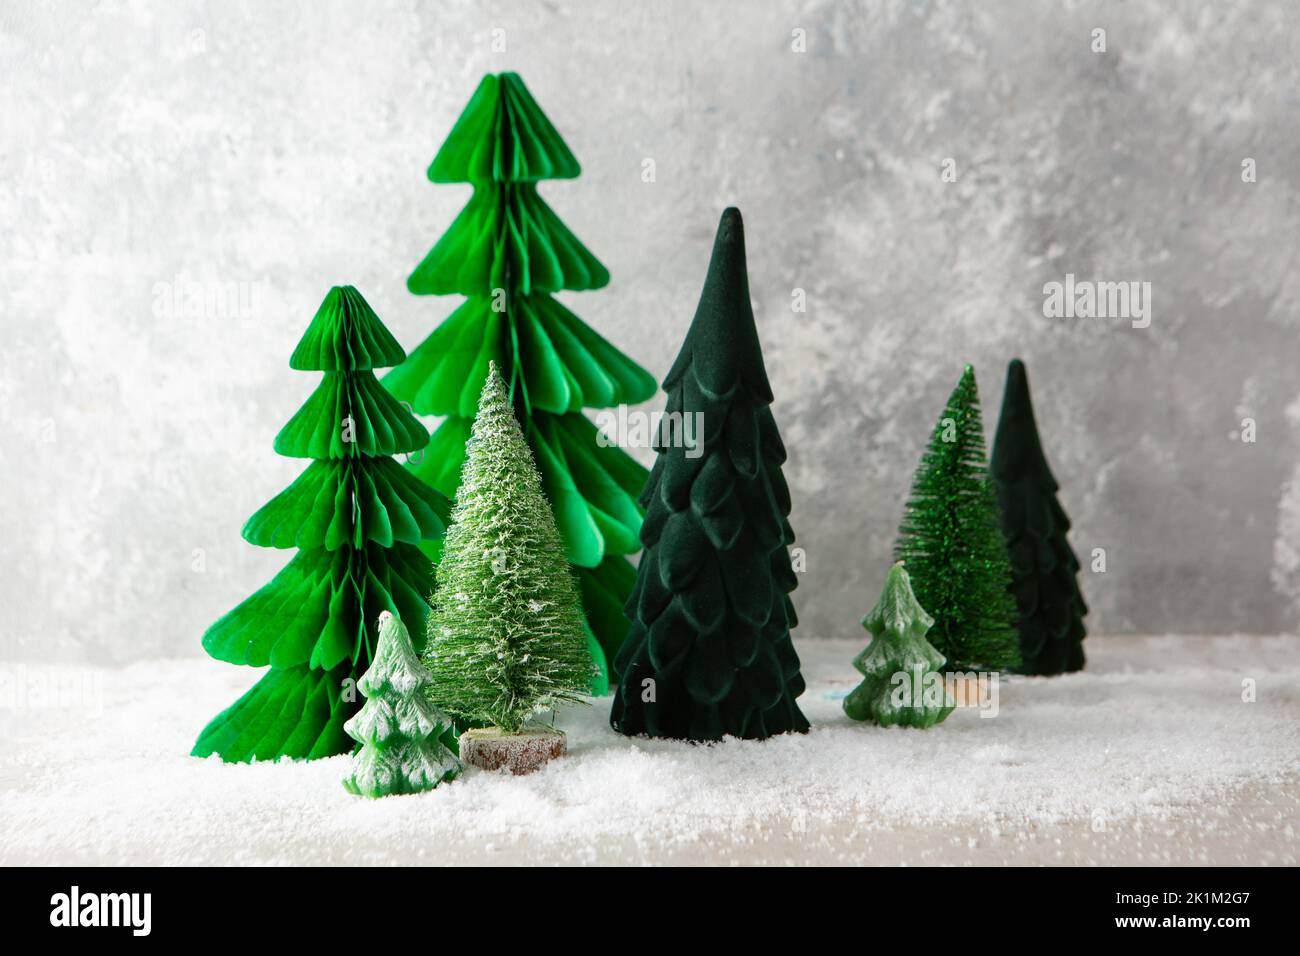 Green Chritmas tree decorations on light background holiday card snow Stock Photo